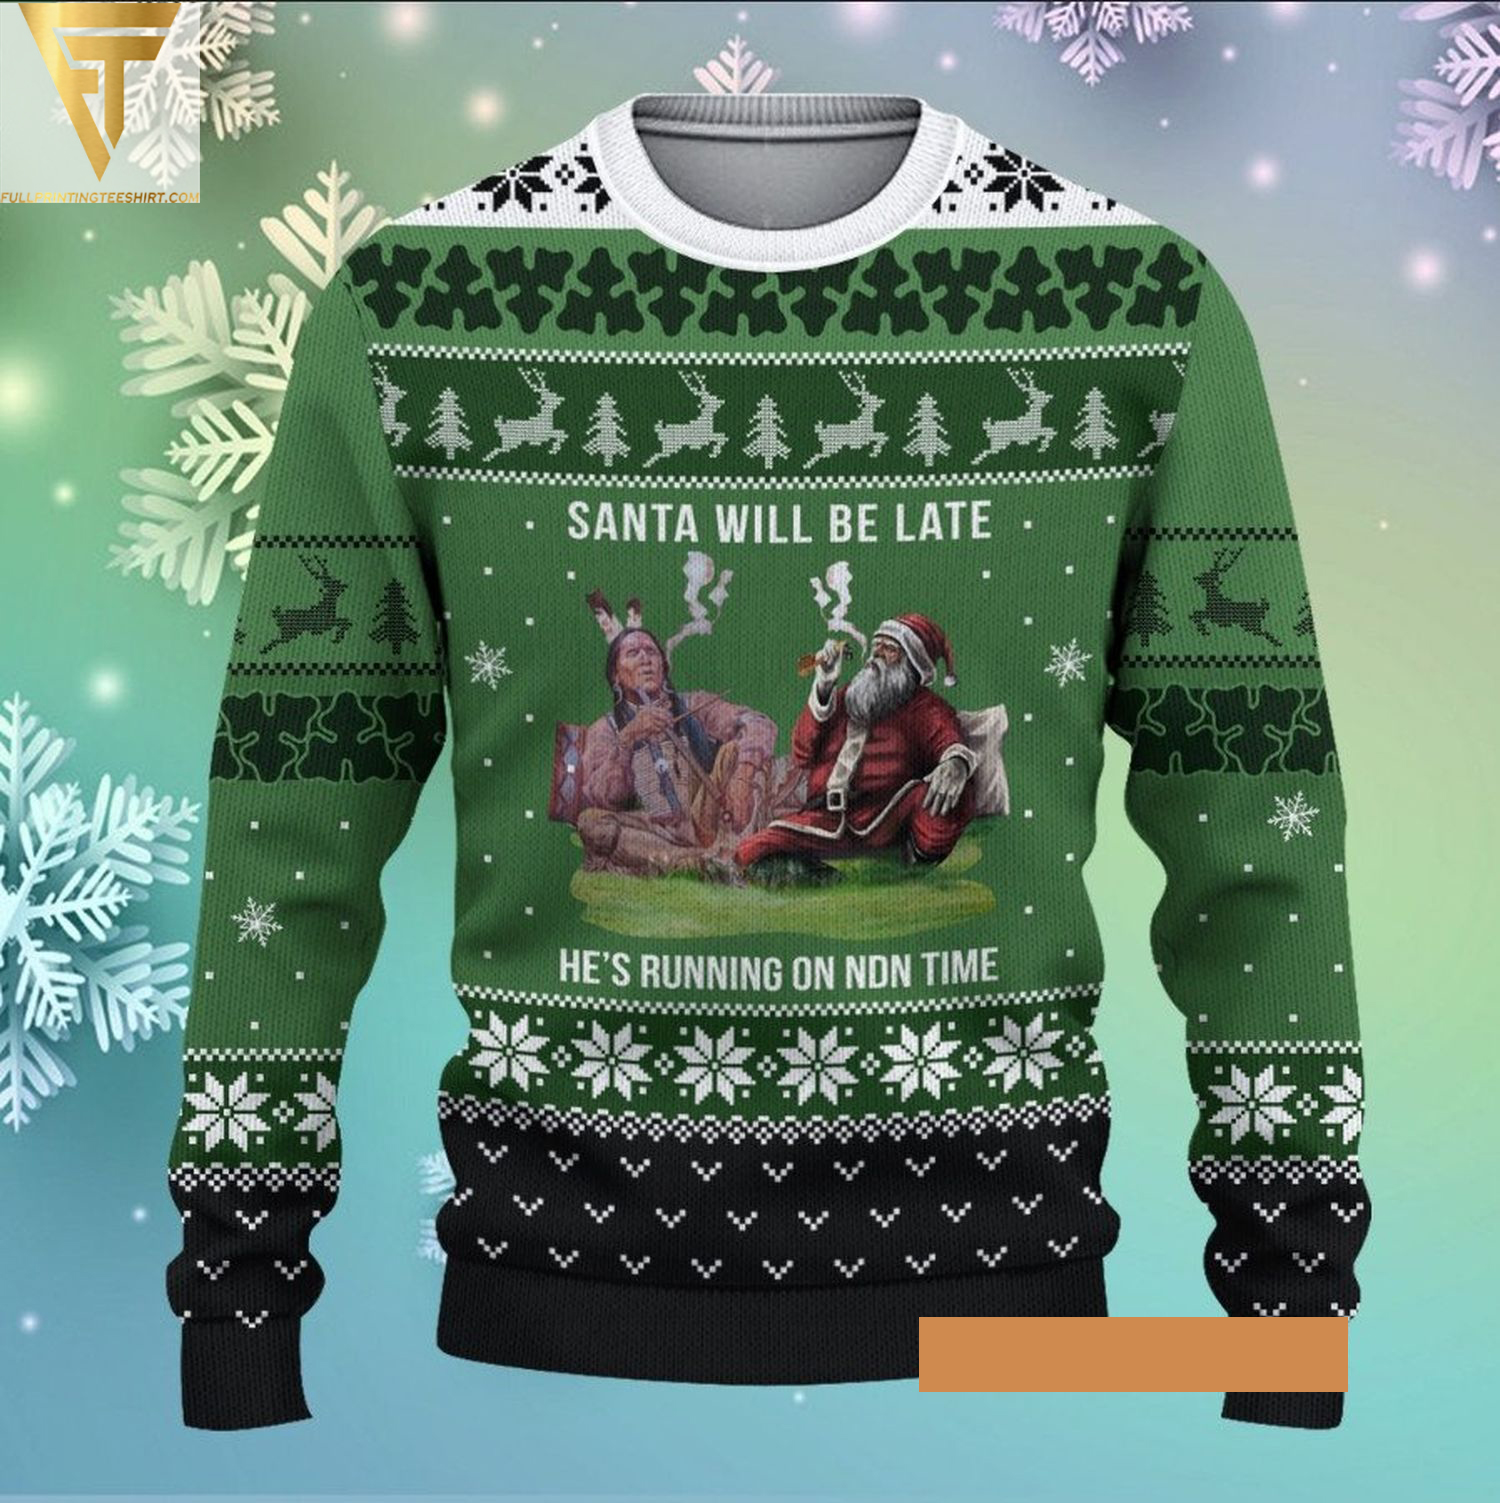 Native american santa will be late ugly he's running on ndn time ugly christmas sweater - Copy (2)